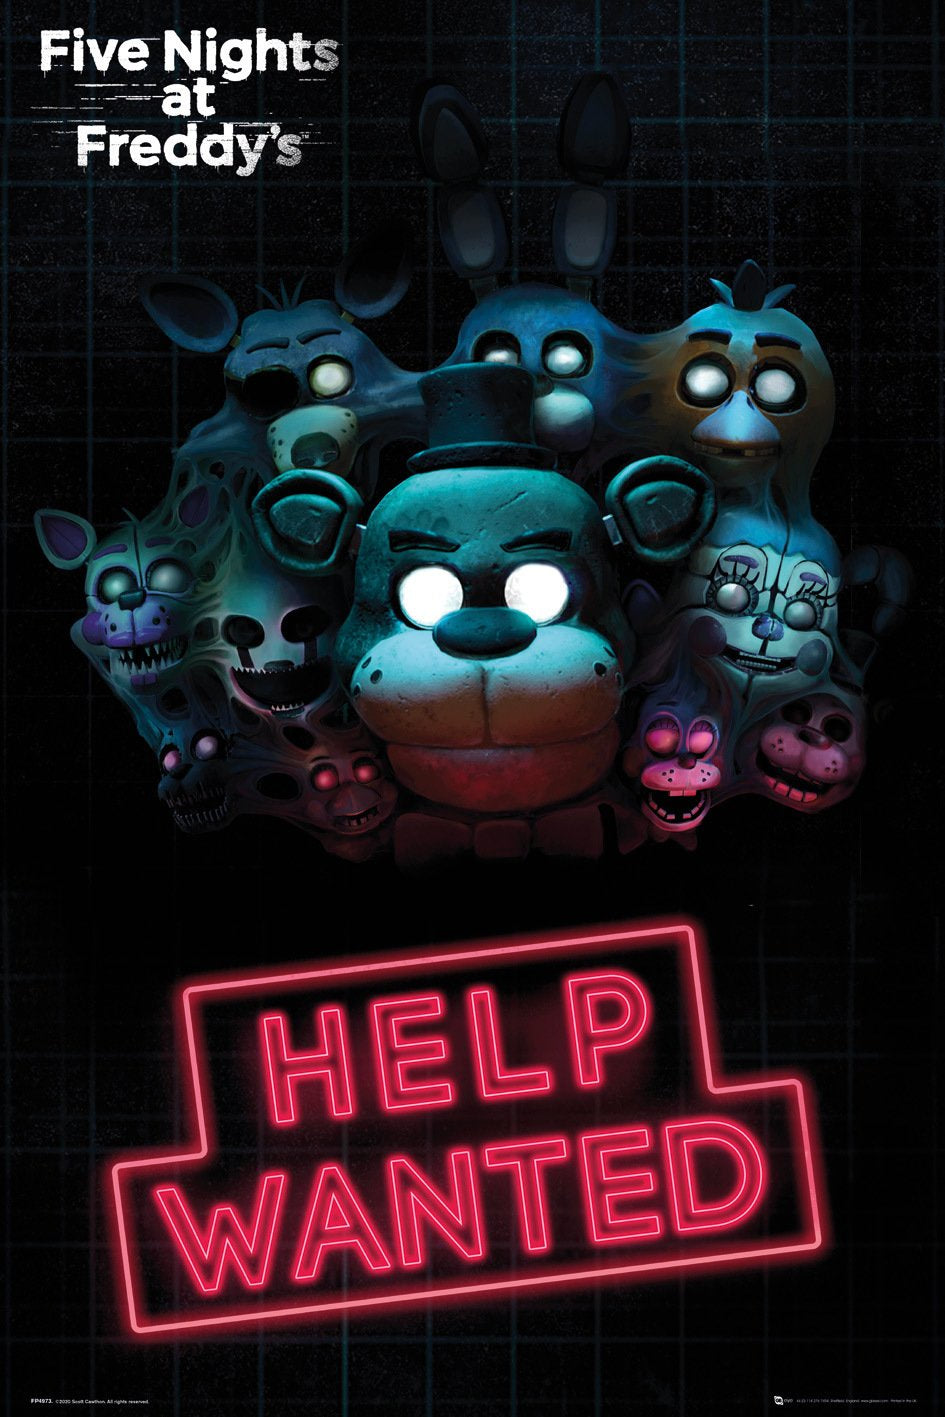 Five Nights At Freddy's Poster- Help Wanted